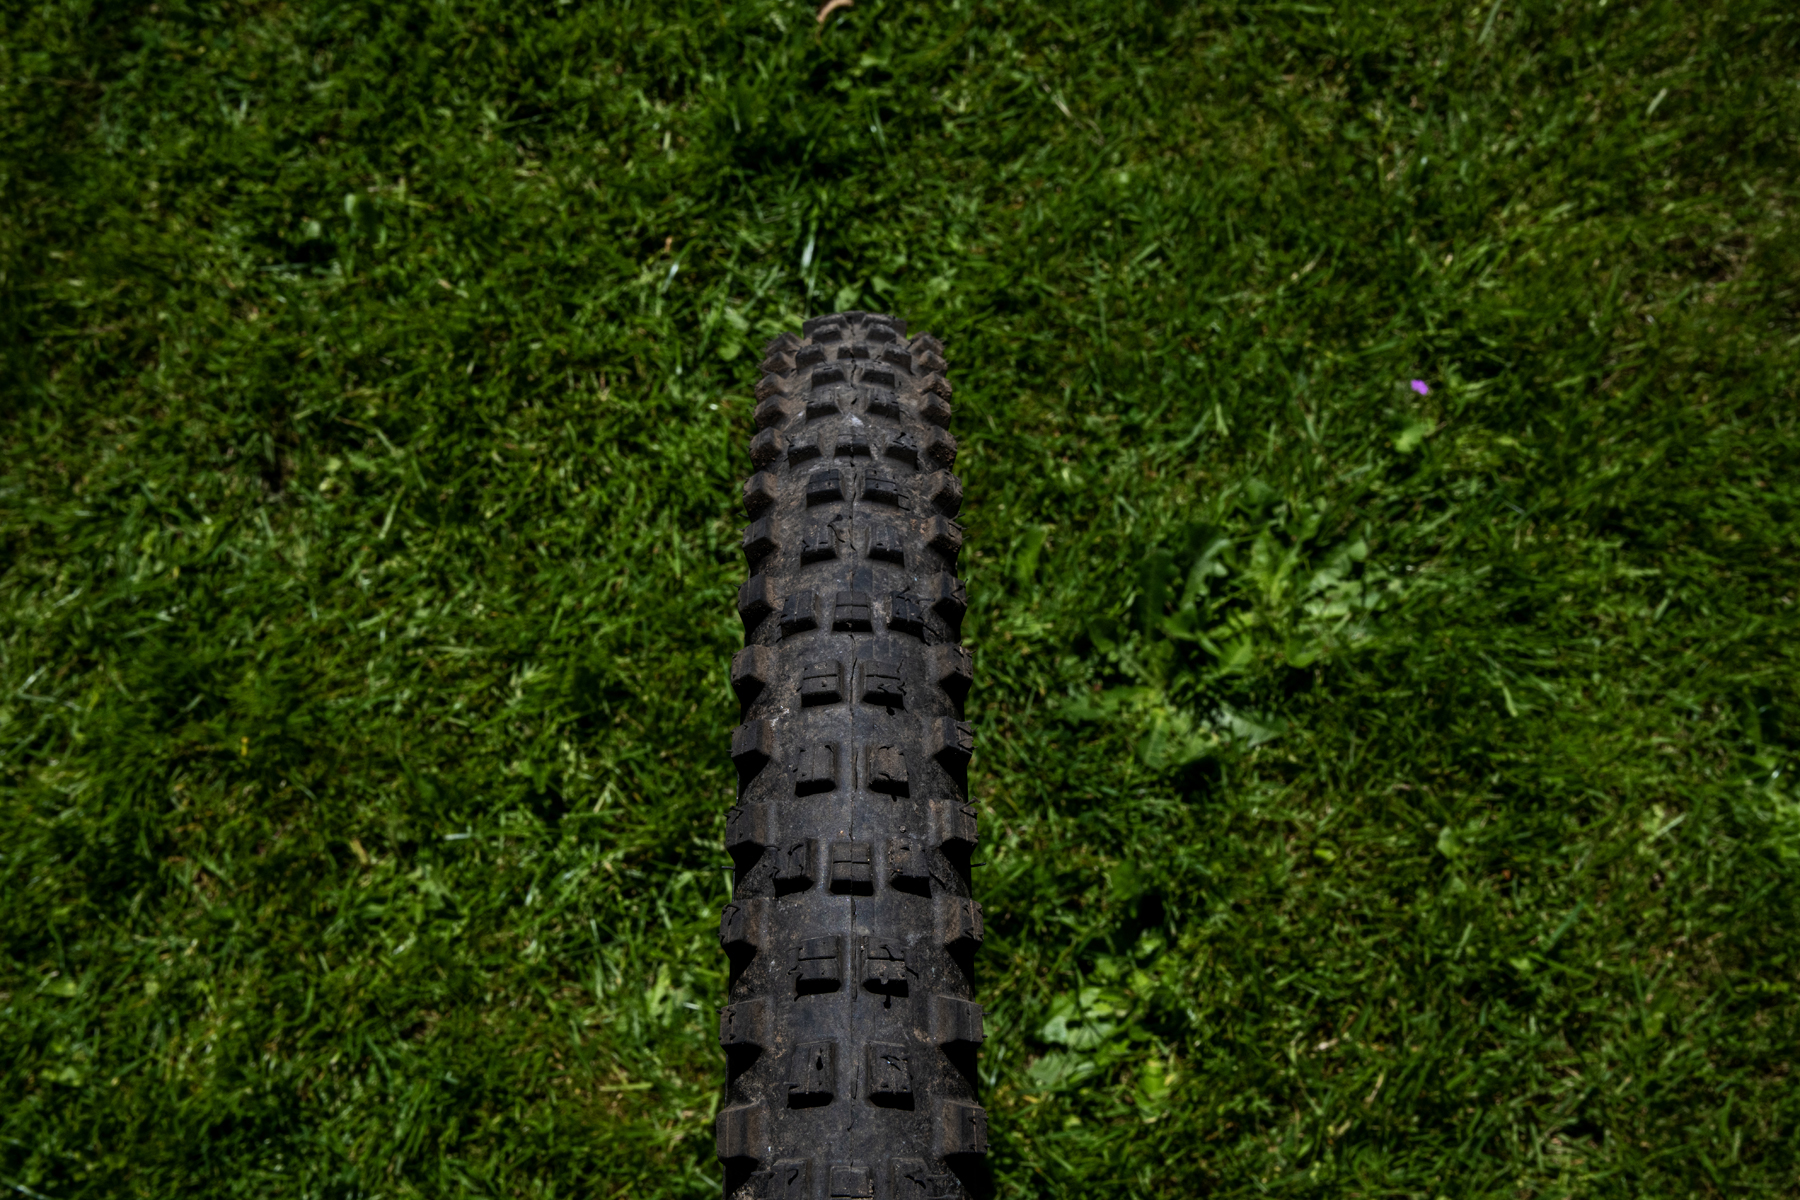 David Golay reviews the new Michelin Enduro and DH tires for Blister